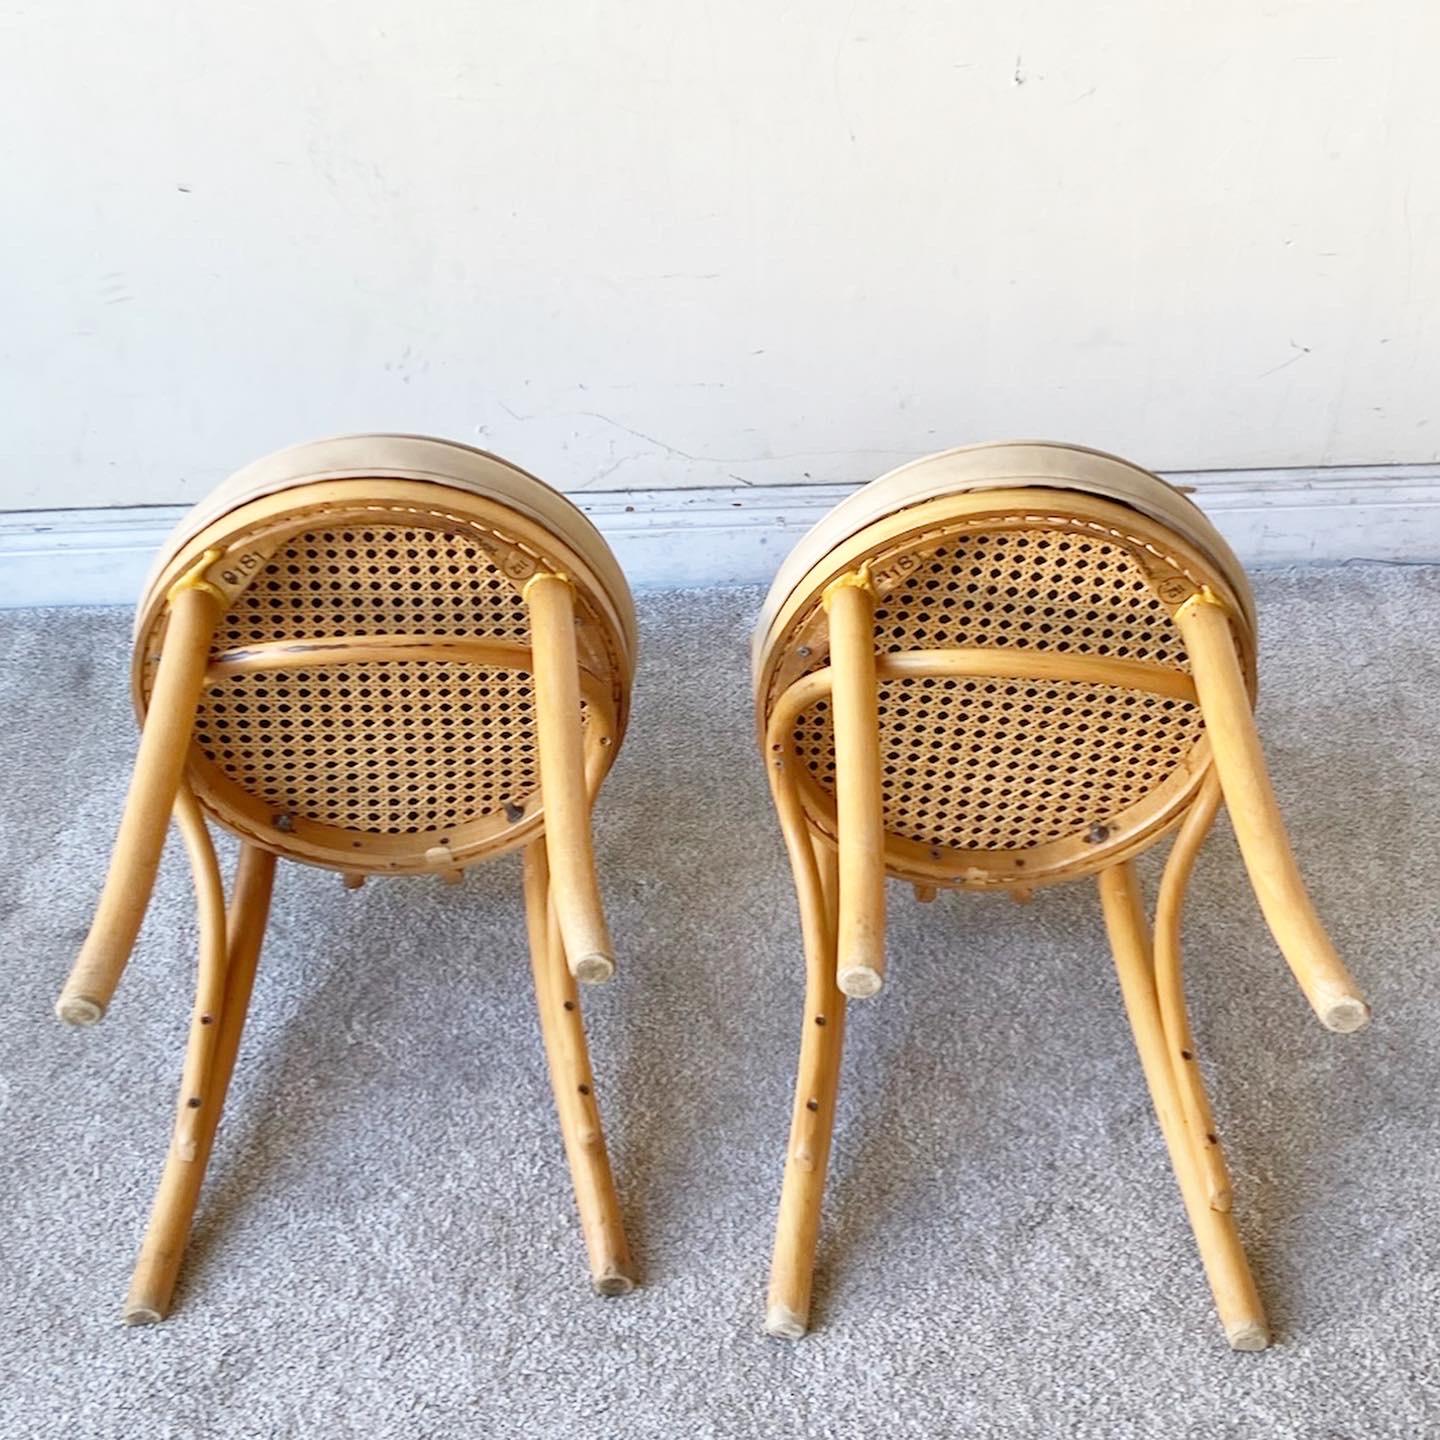 Vintage Boho Chic Bentwood Cafe Bistro Dining Chairs, Set of 4 In Good Condition For Sale In Delray Beach, FL